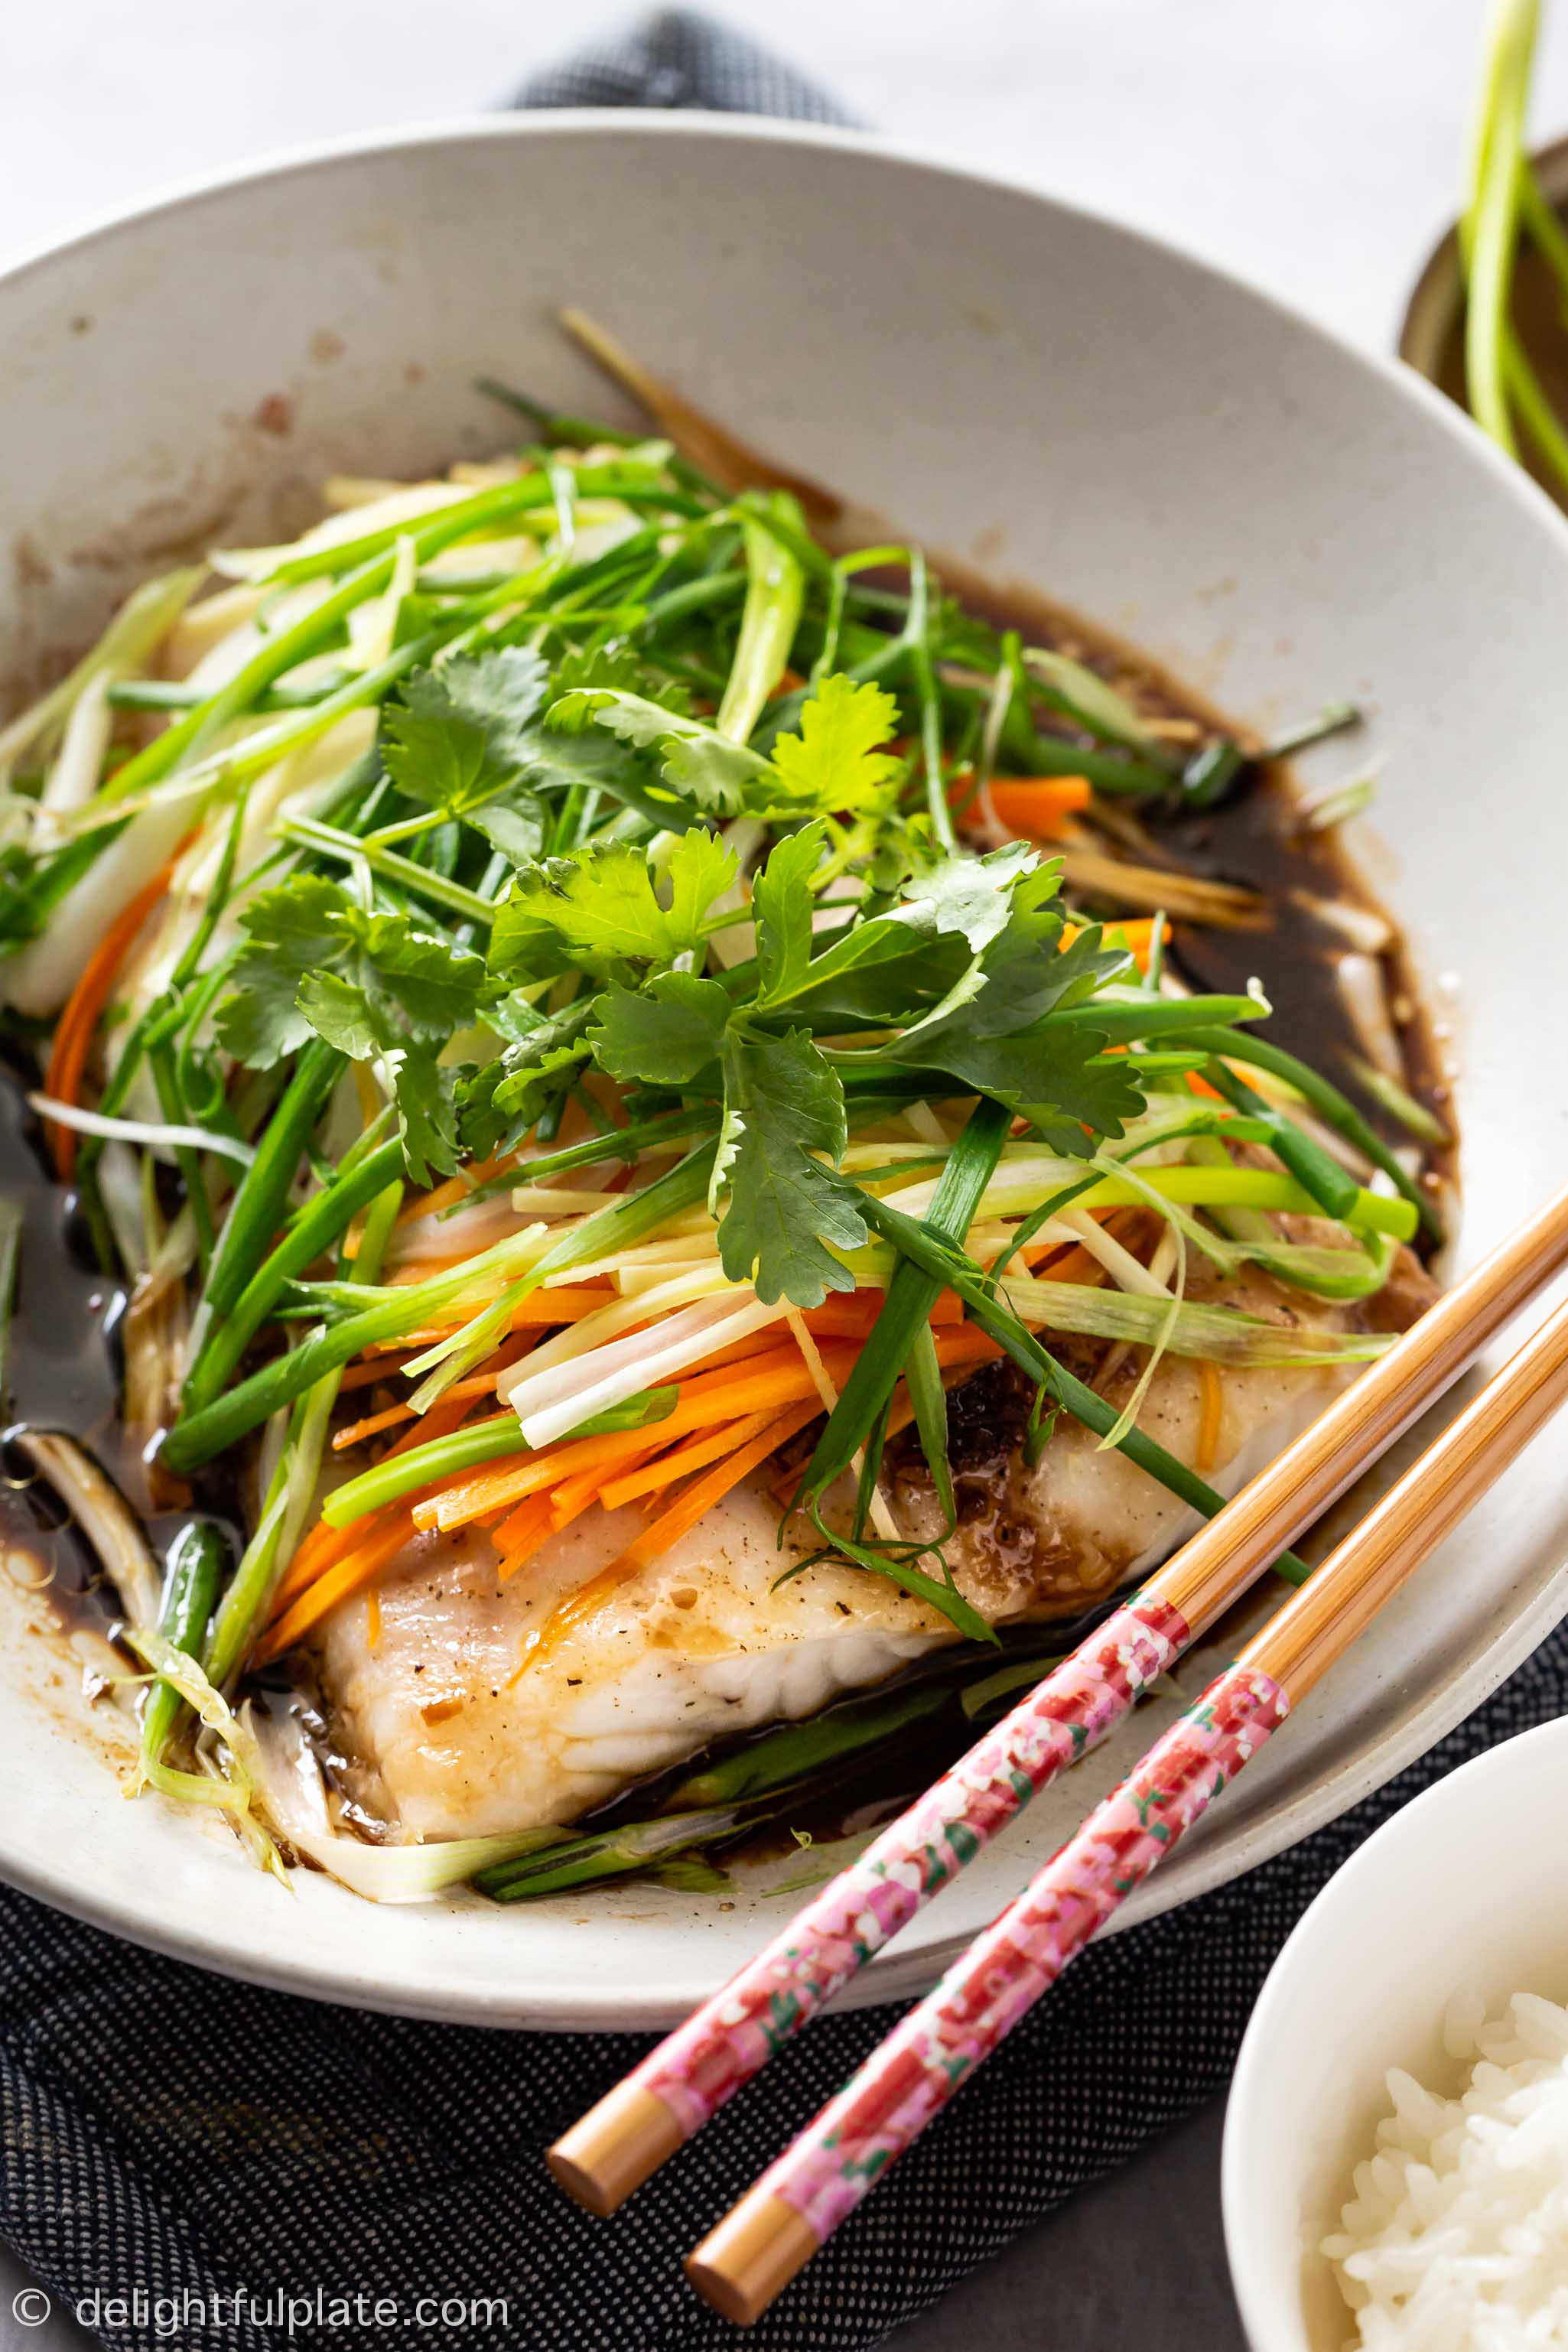 I. Introduction to the Healthy Benefits of Steamed Fish and Vegetables